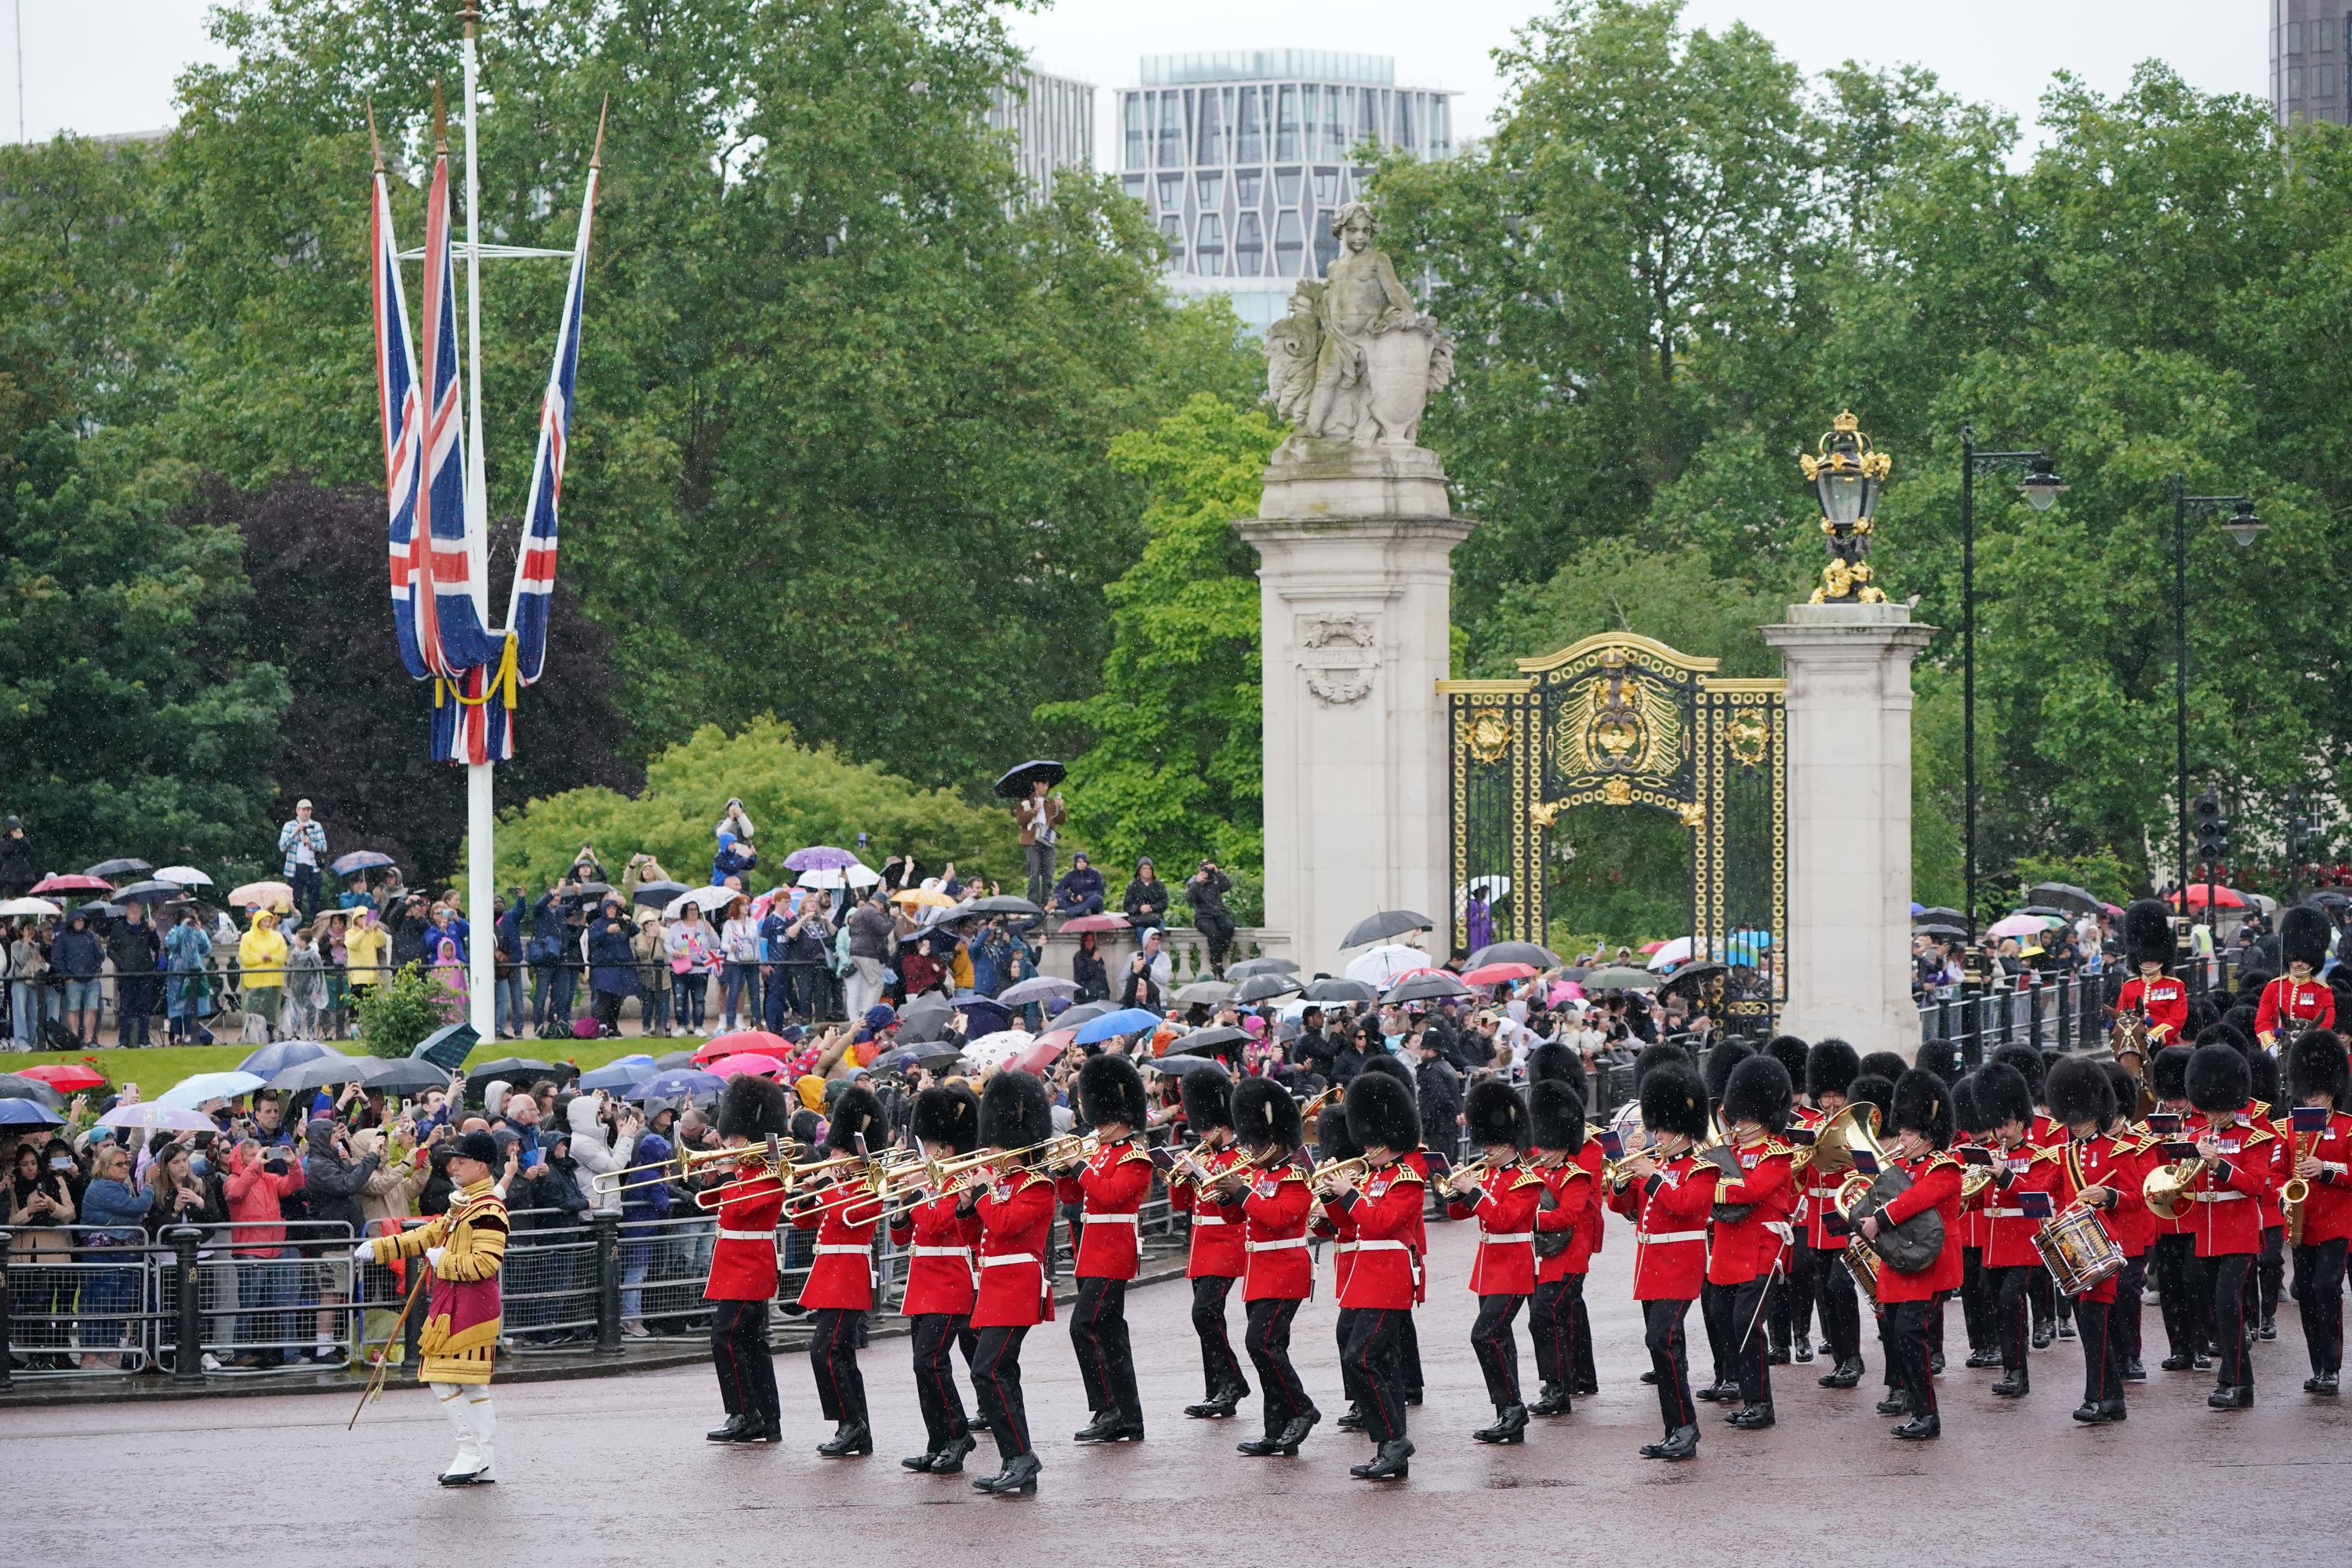 The Grenadier Guards Band marches along The Mall towards the Horse Guards Parade